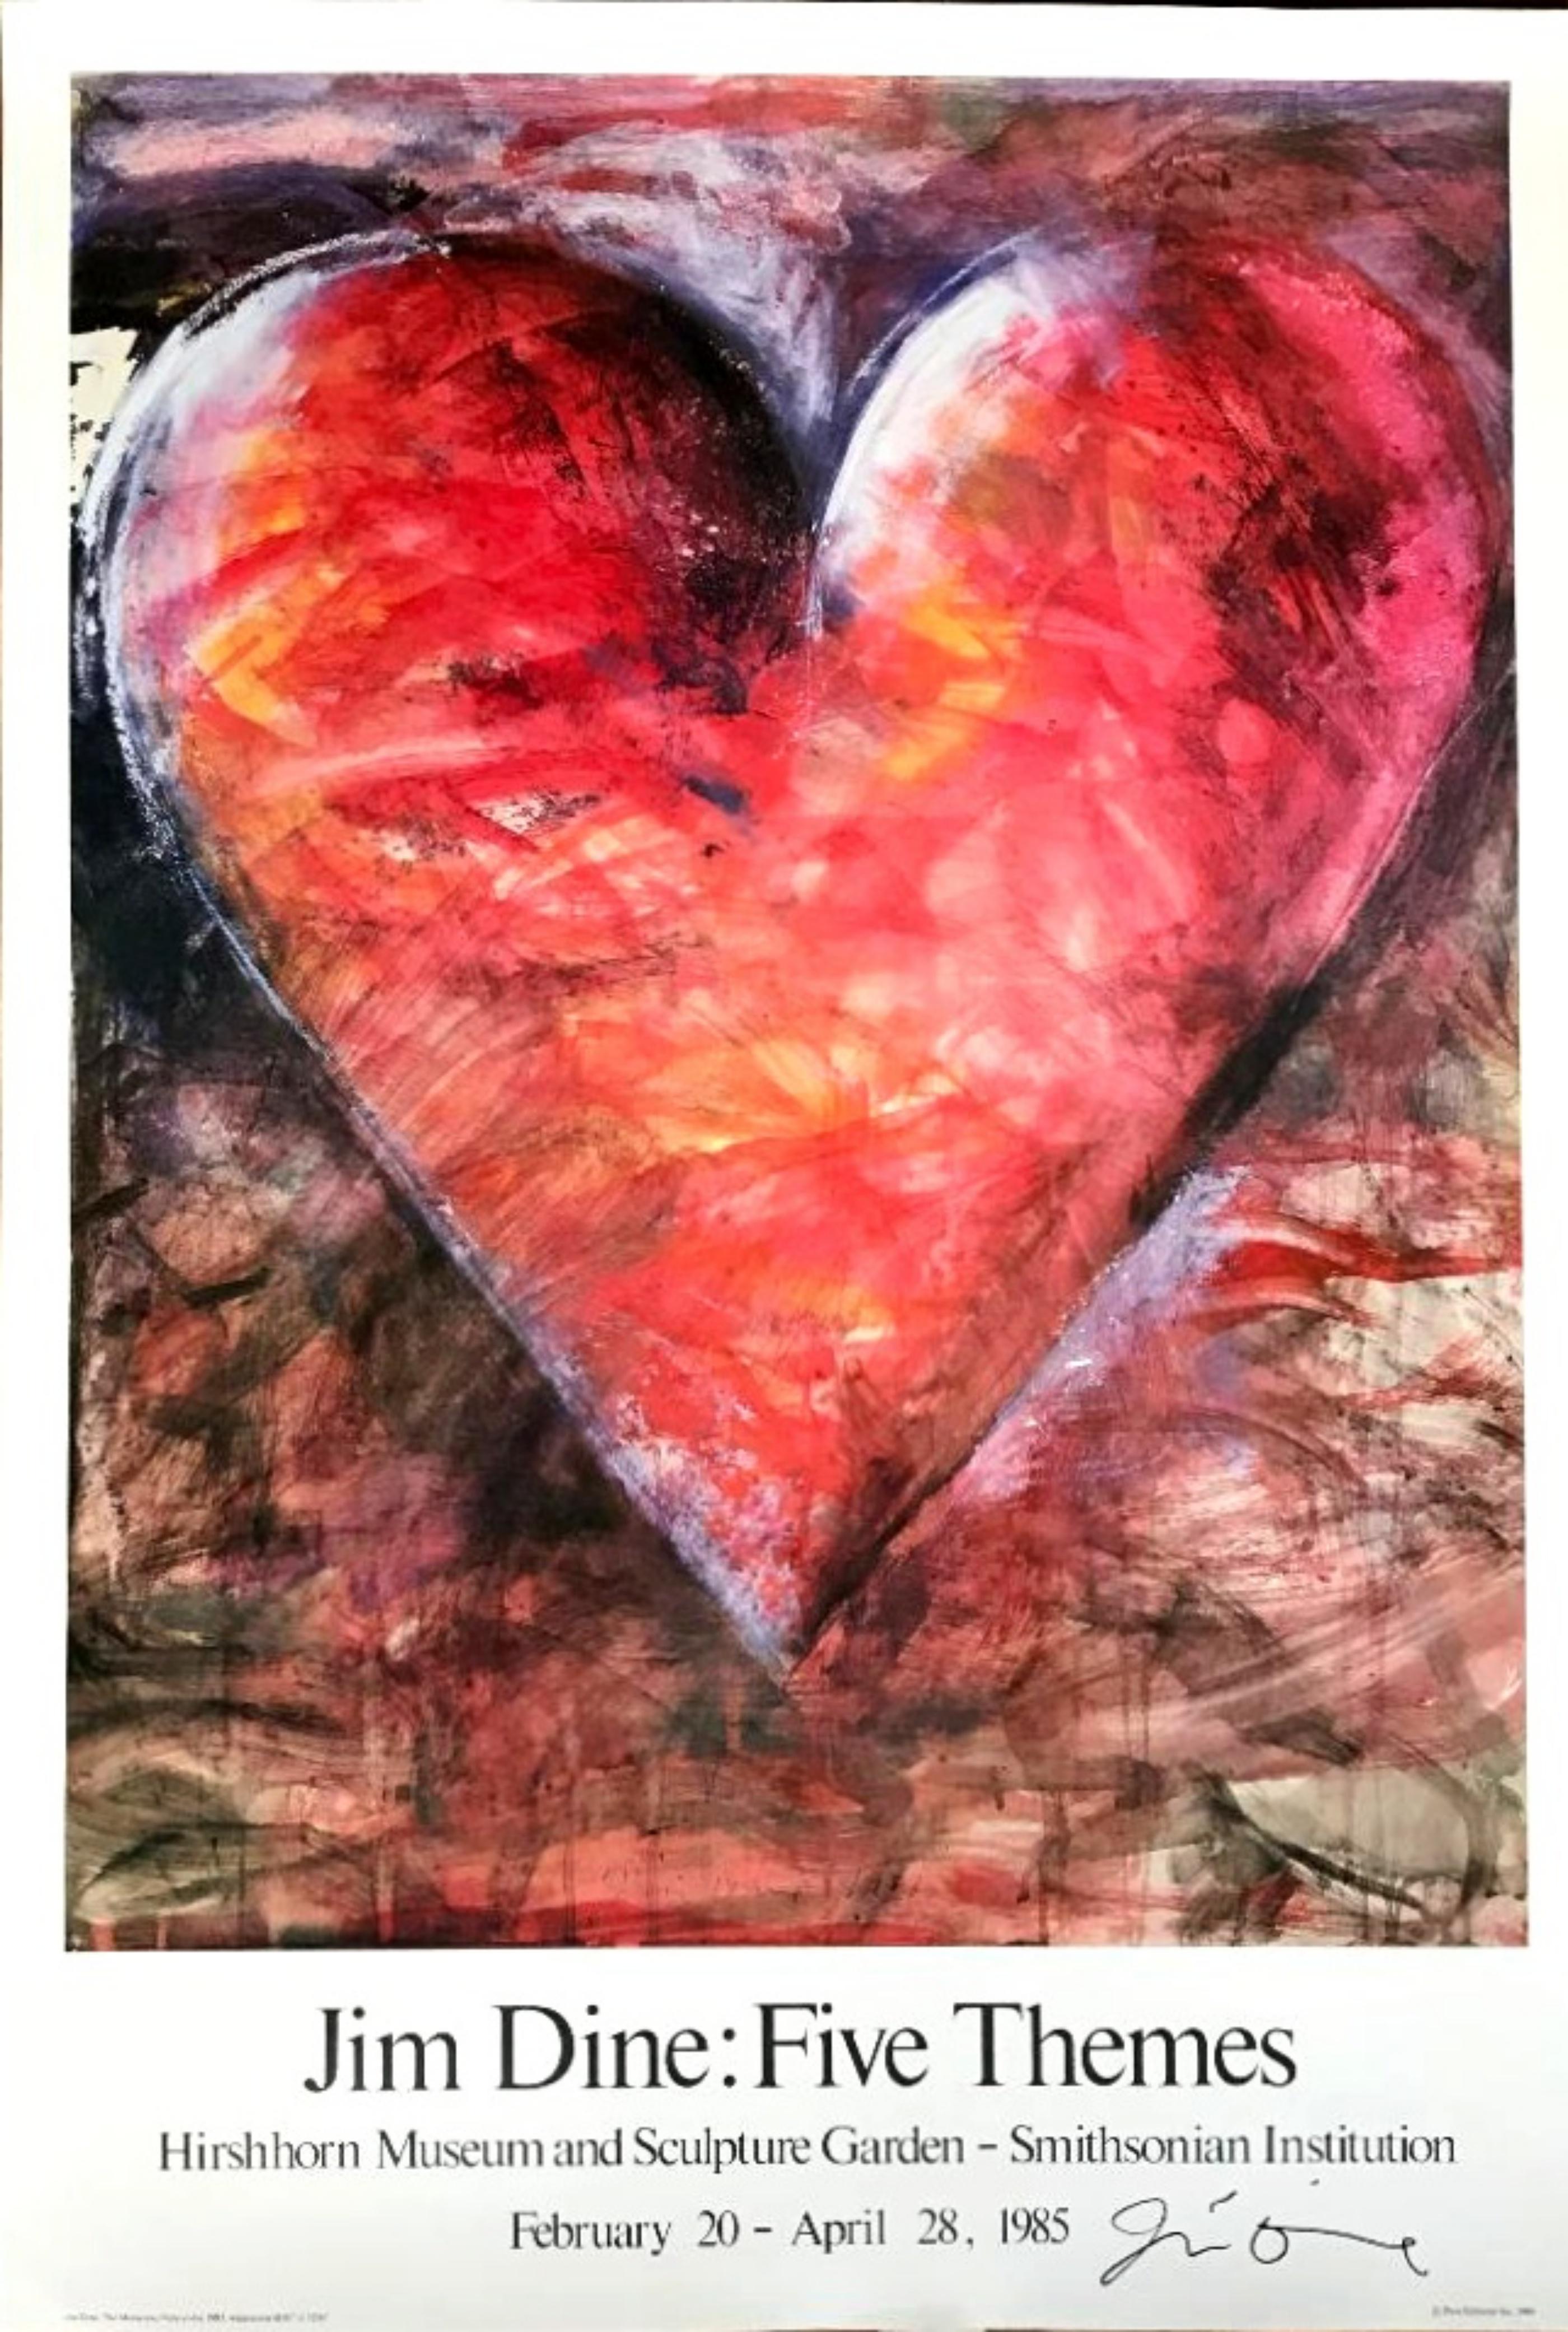 Jim Dine: Five Themes (Hand Signed), 1985
Offset lithograph. Hand signed by Jim Dine
Boldly signed by Jim Dine for the gallery in black marker on the front.
35 × 23 inches
Unframed
How many hearts has Jim Dine drawn over the course of his career?